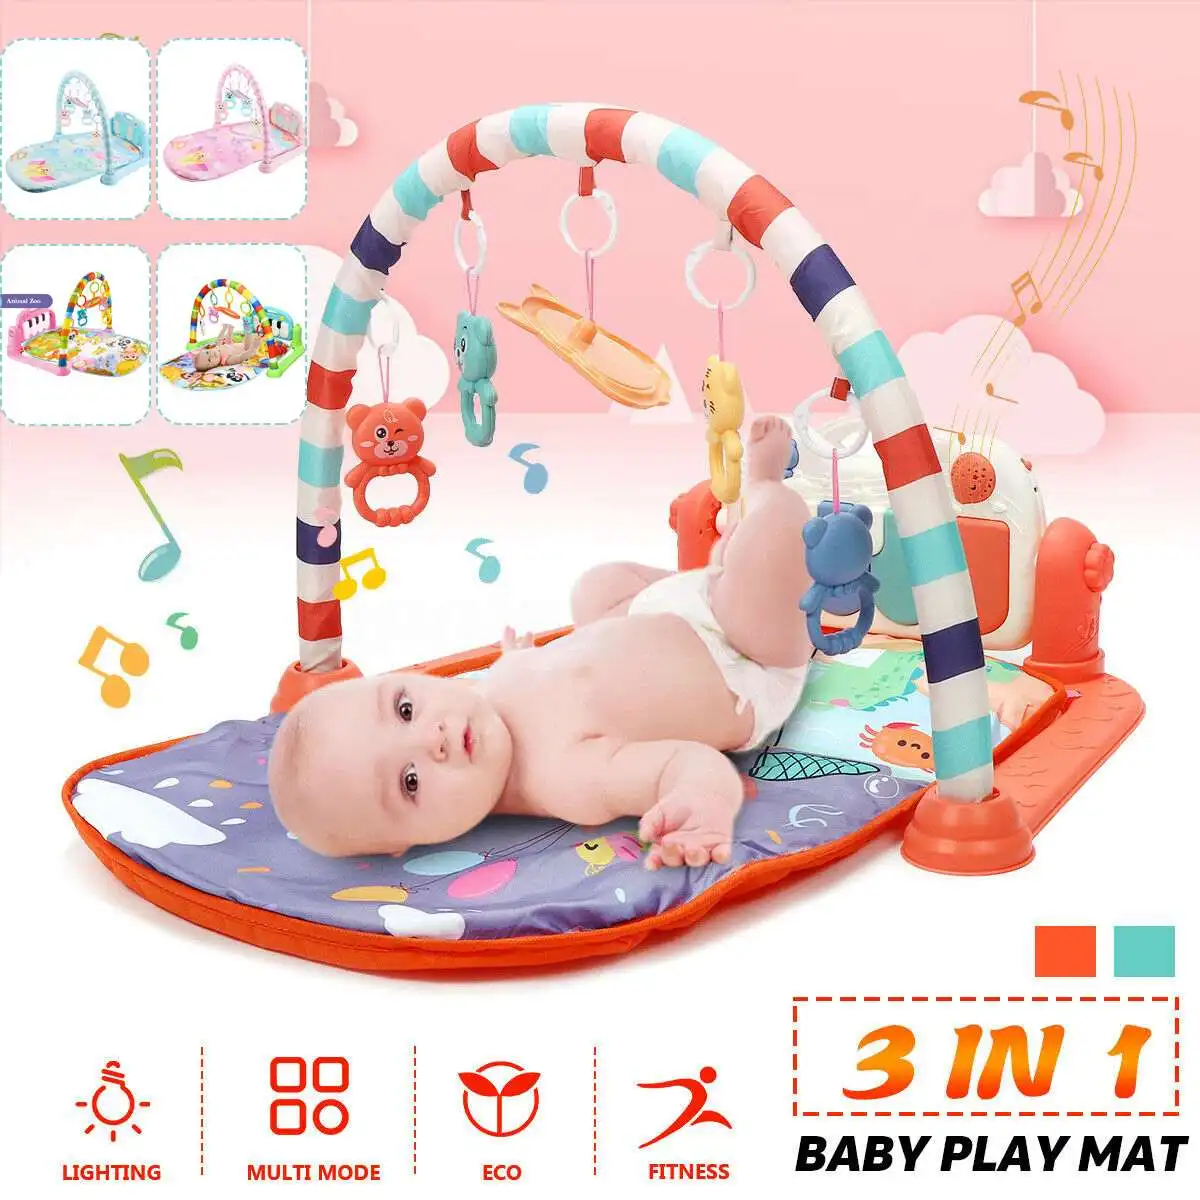 Baby Activity Gym Children's Play Mat 0-12 Months Developing Carpet Soft Rattles Musical Toys Activity Rug For Babies Games